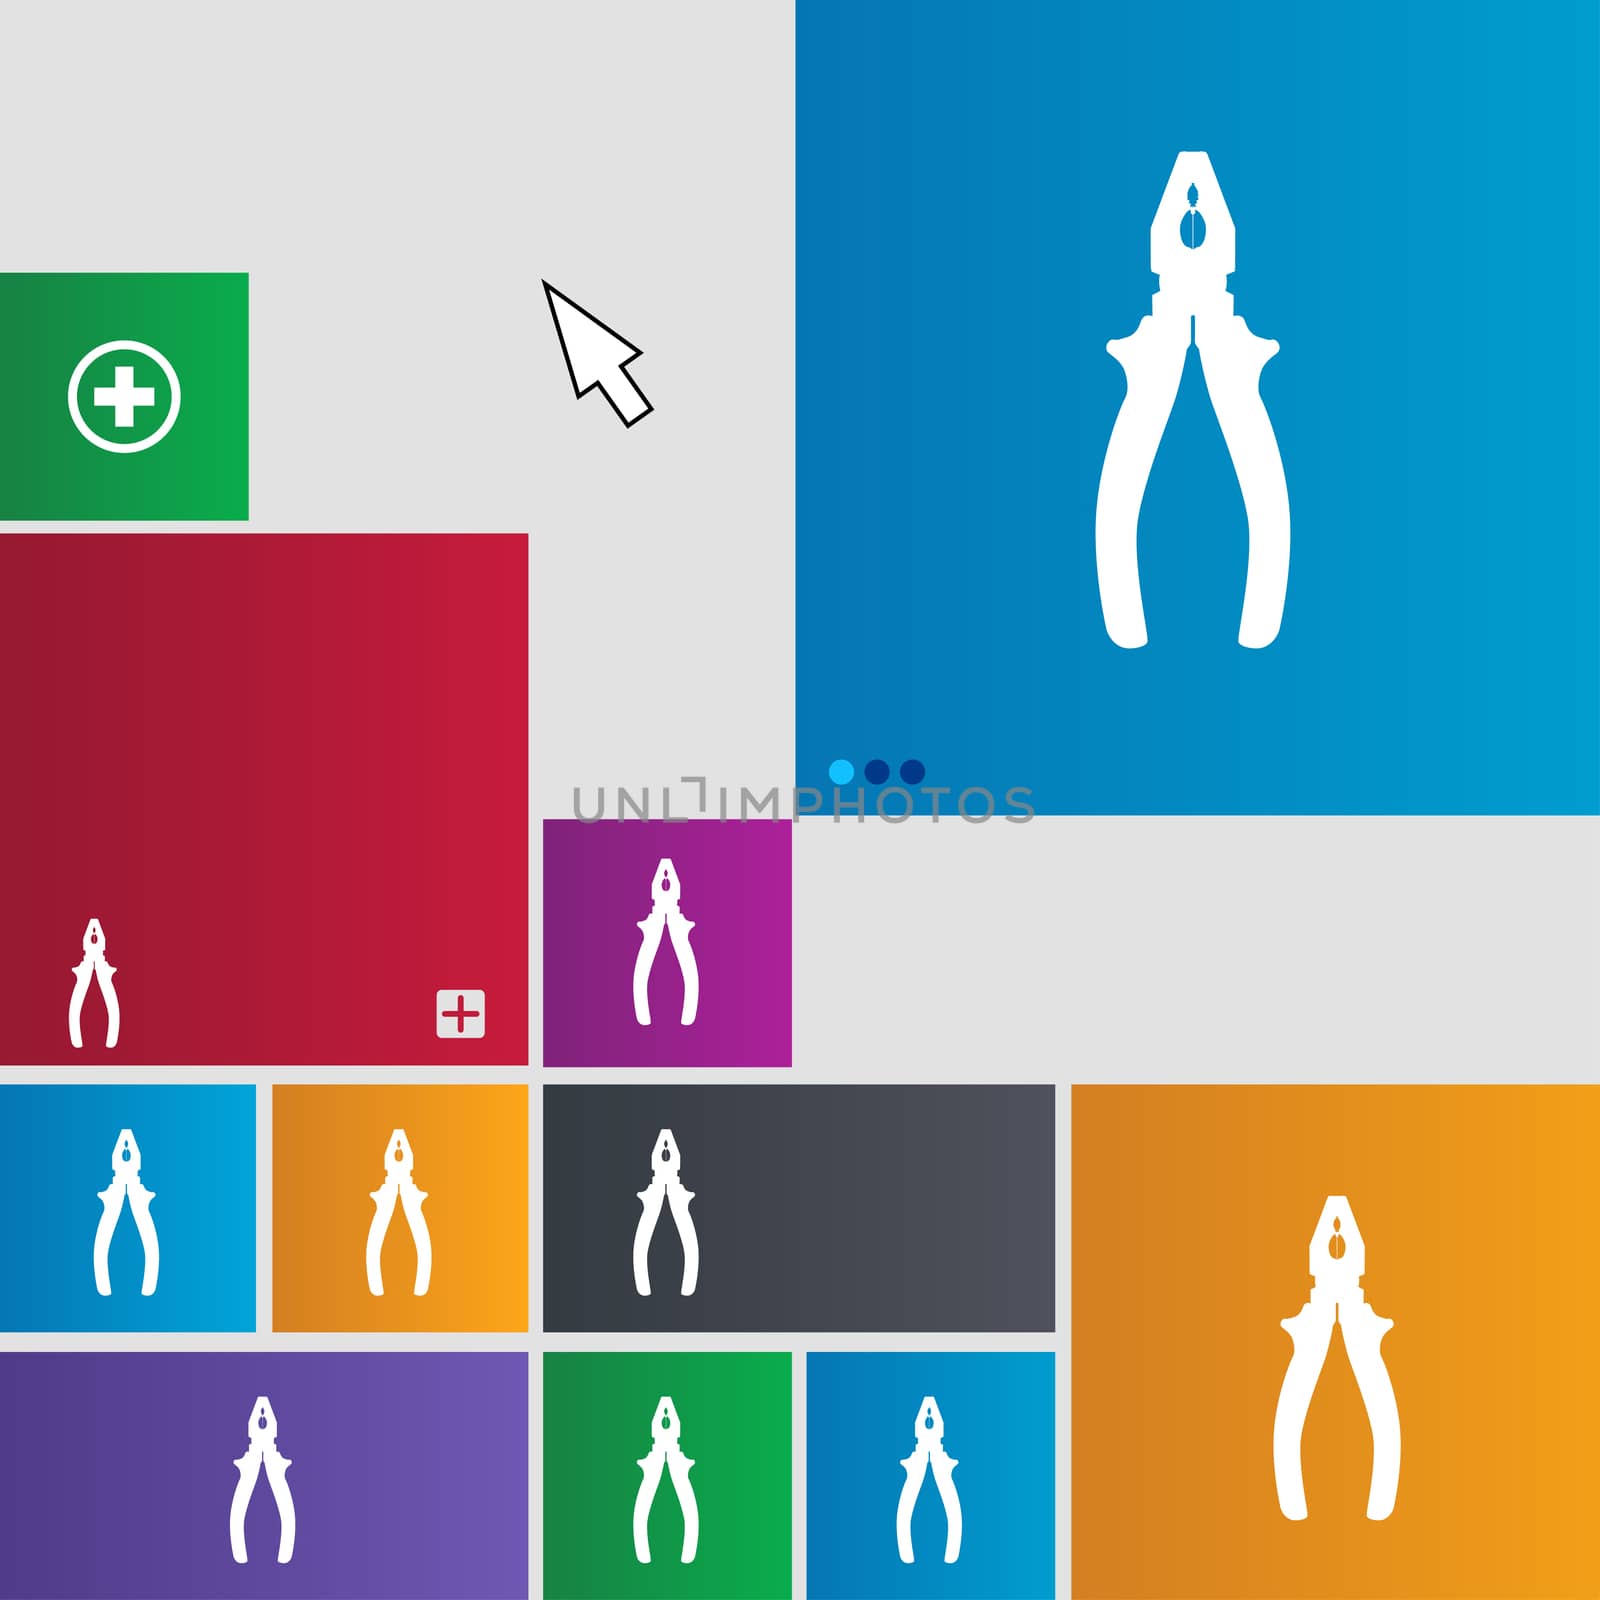 pliers icon sign. buttons. Modern interface website buttons with cursor pointer. illustration